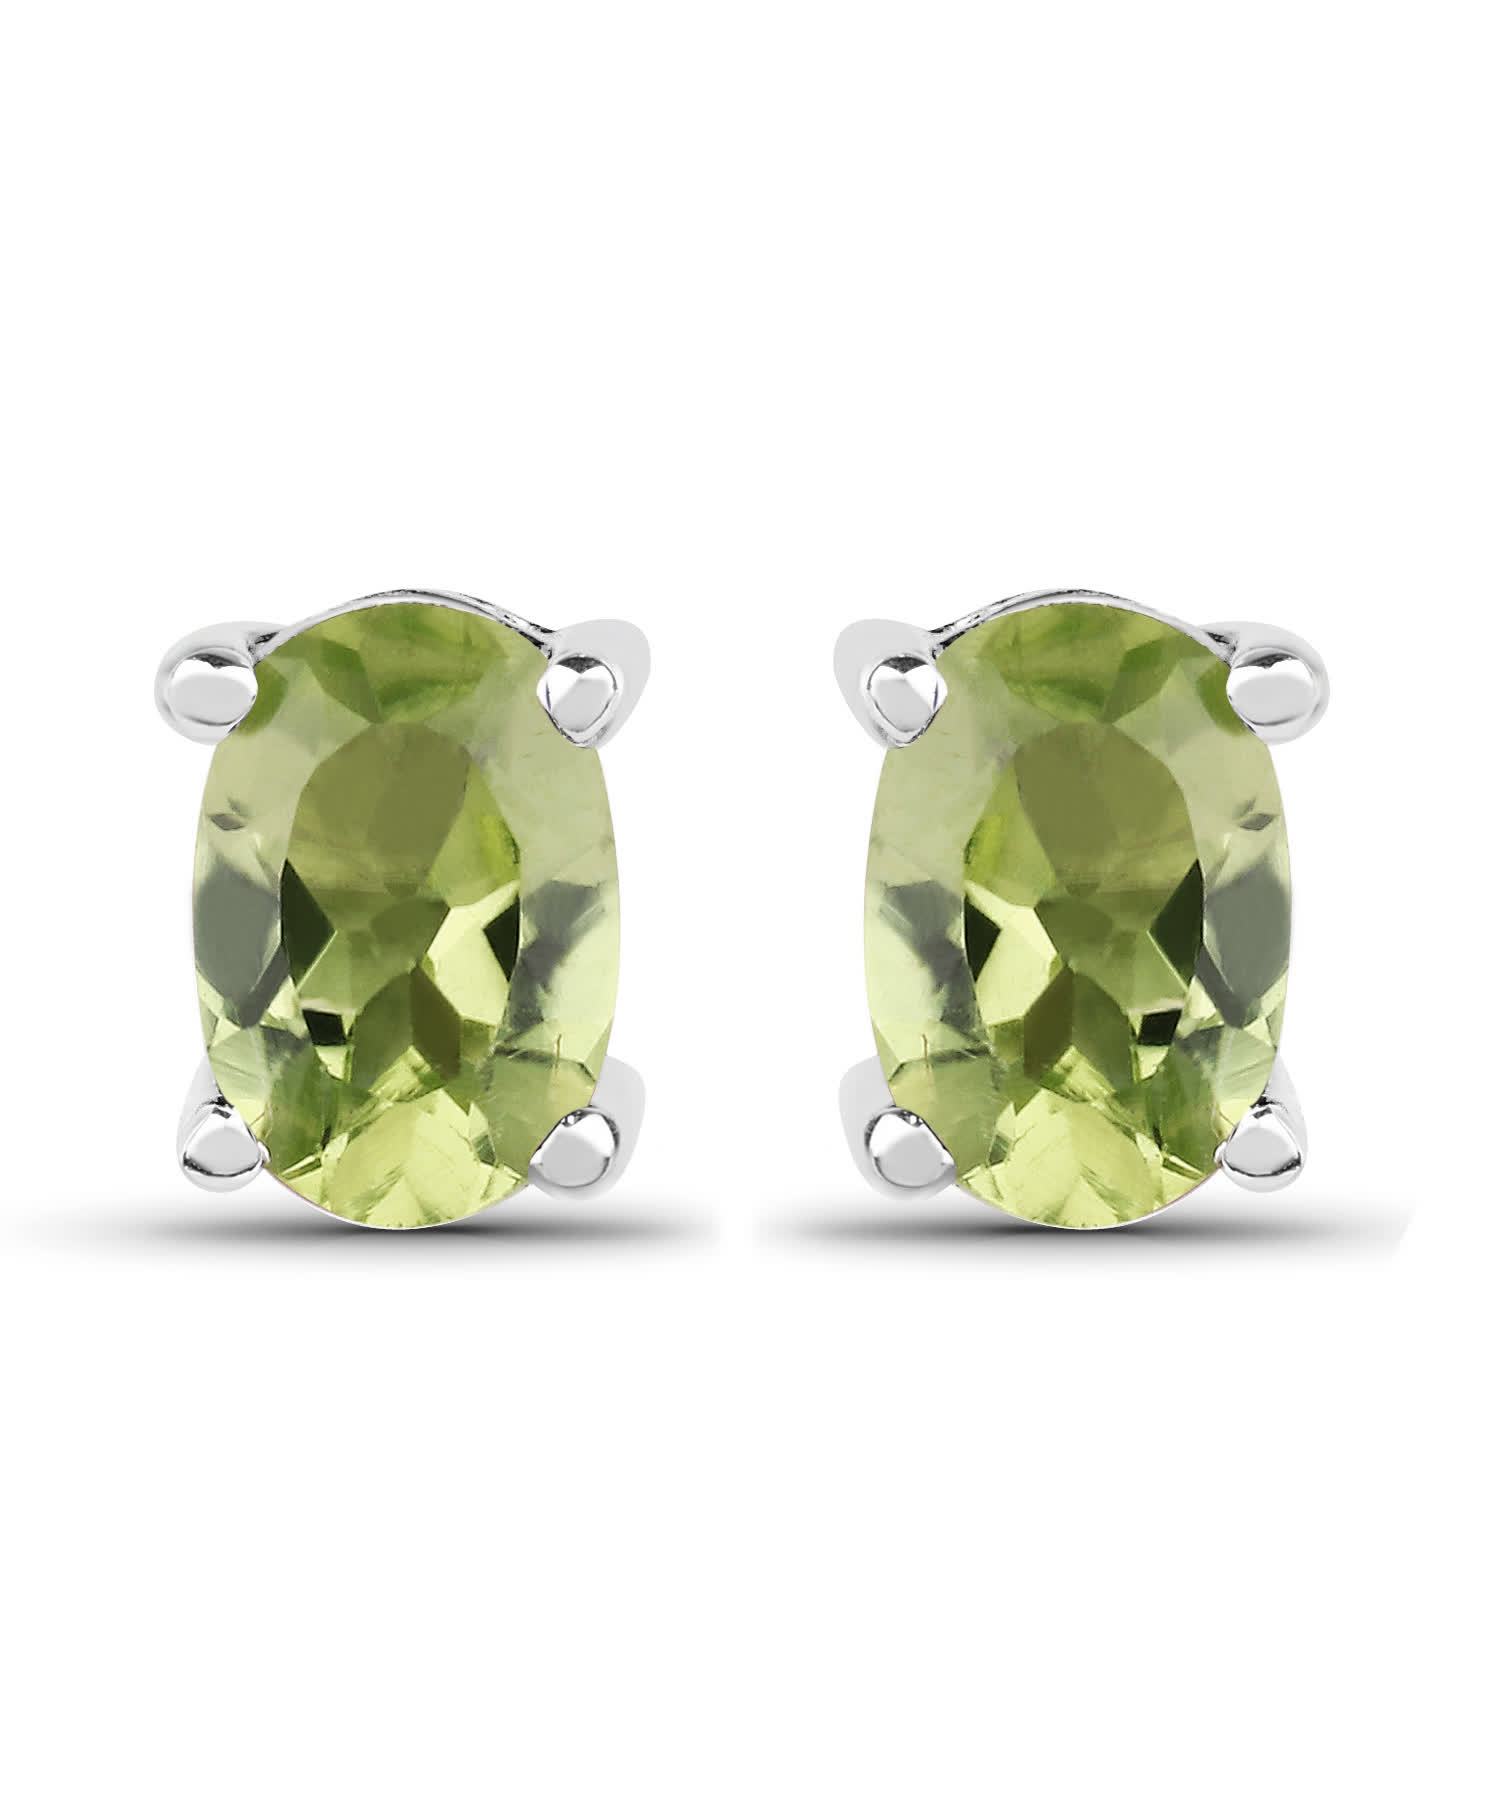 1.66ctw Natural Peridot Rhodium Plated 925 Sterling Silver Stud Earrings View 1